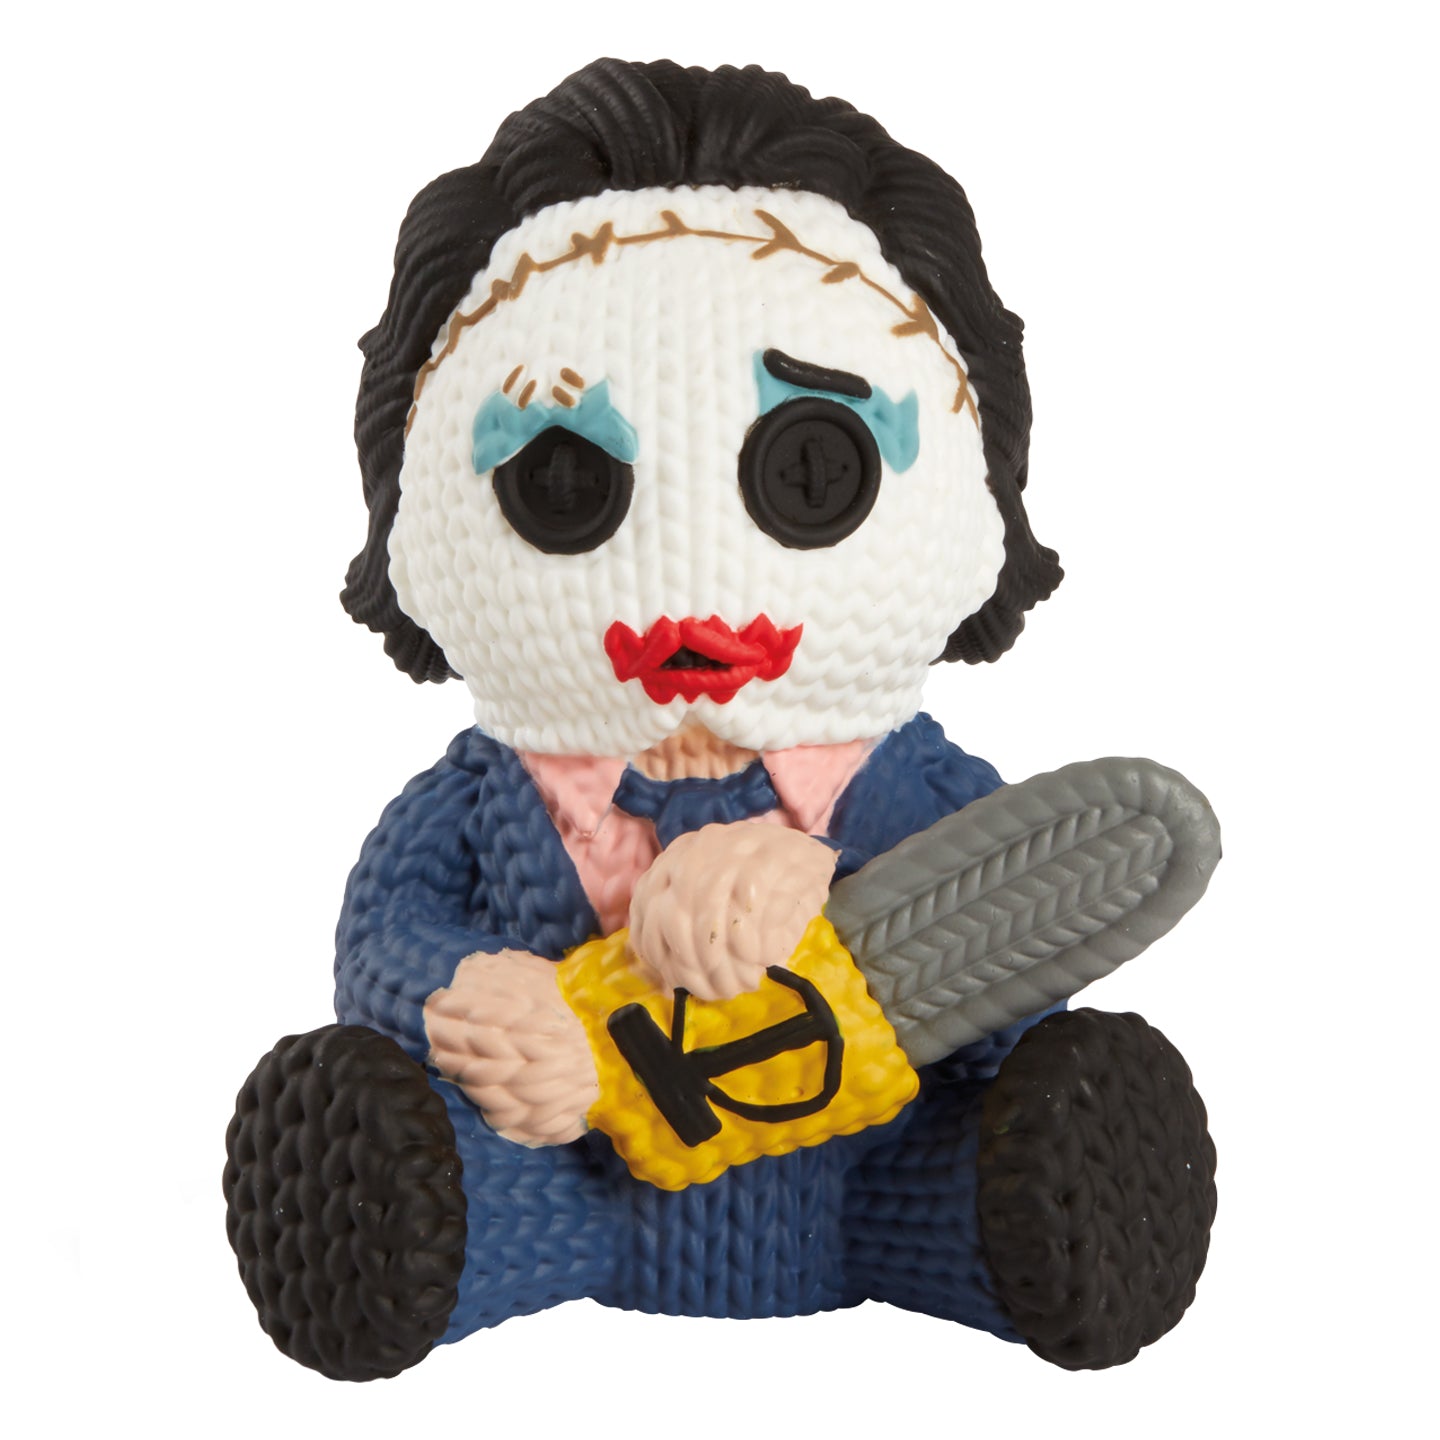 The Texas Chainsaw Massacre - Leatherface Pretty Woman Collectible Vinyl Figure from Handmade By Robots